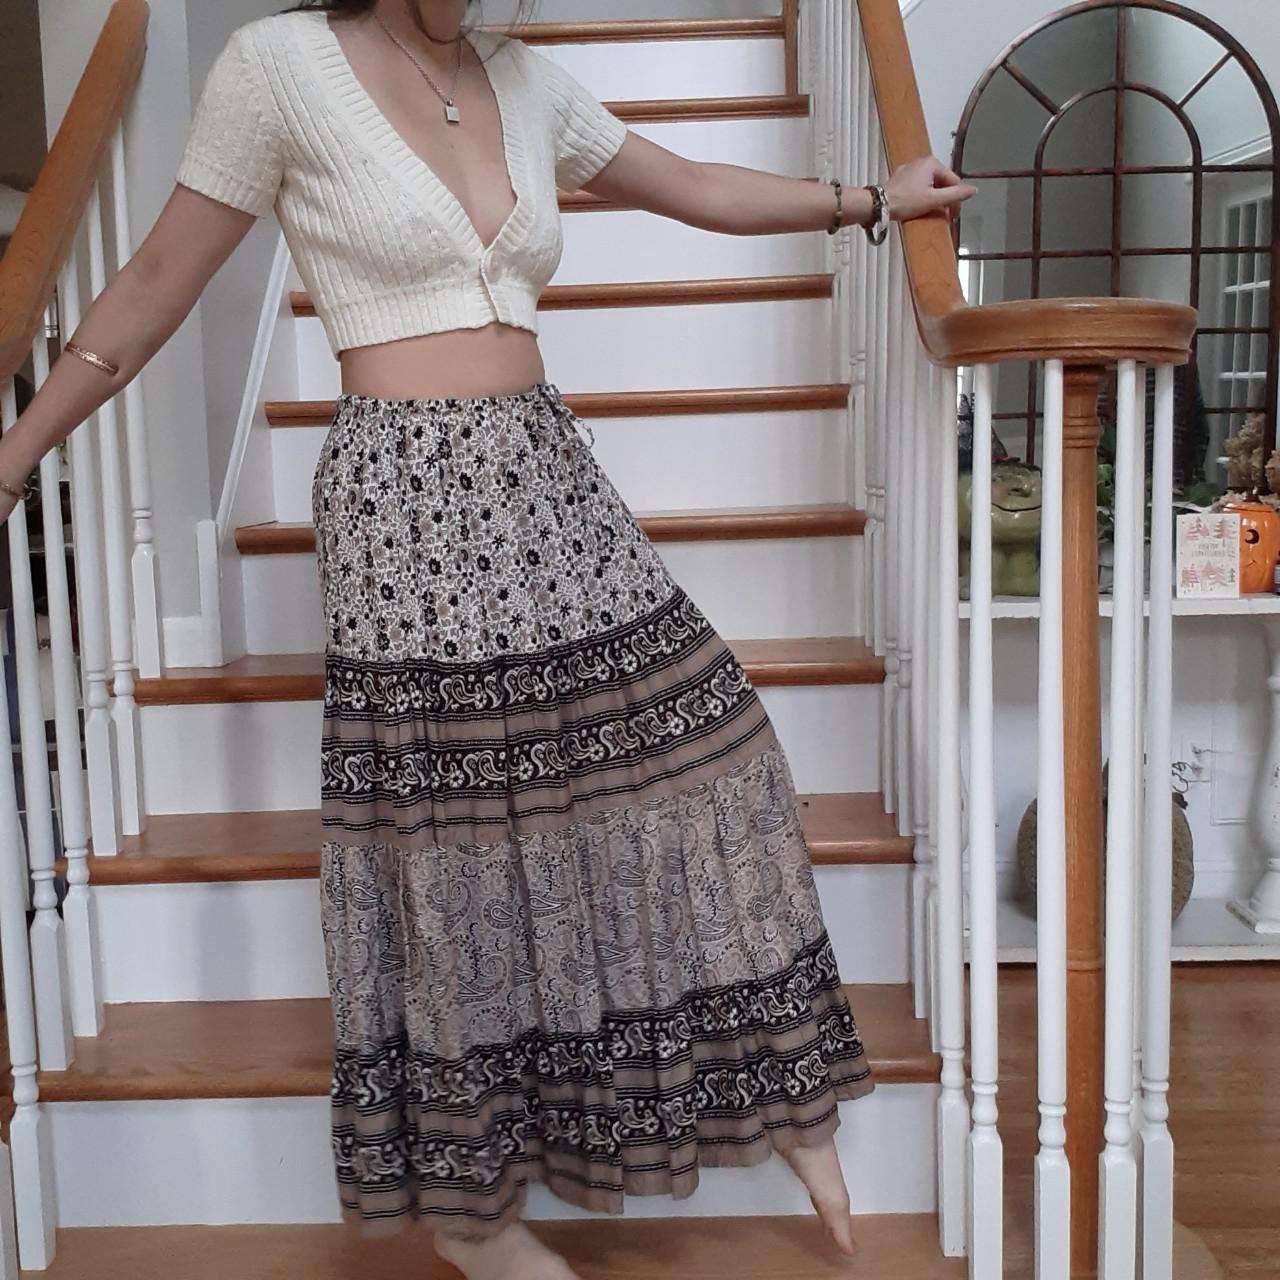 Product Image 3 - Boho brown Maxi skirt
The hippy